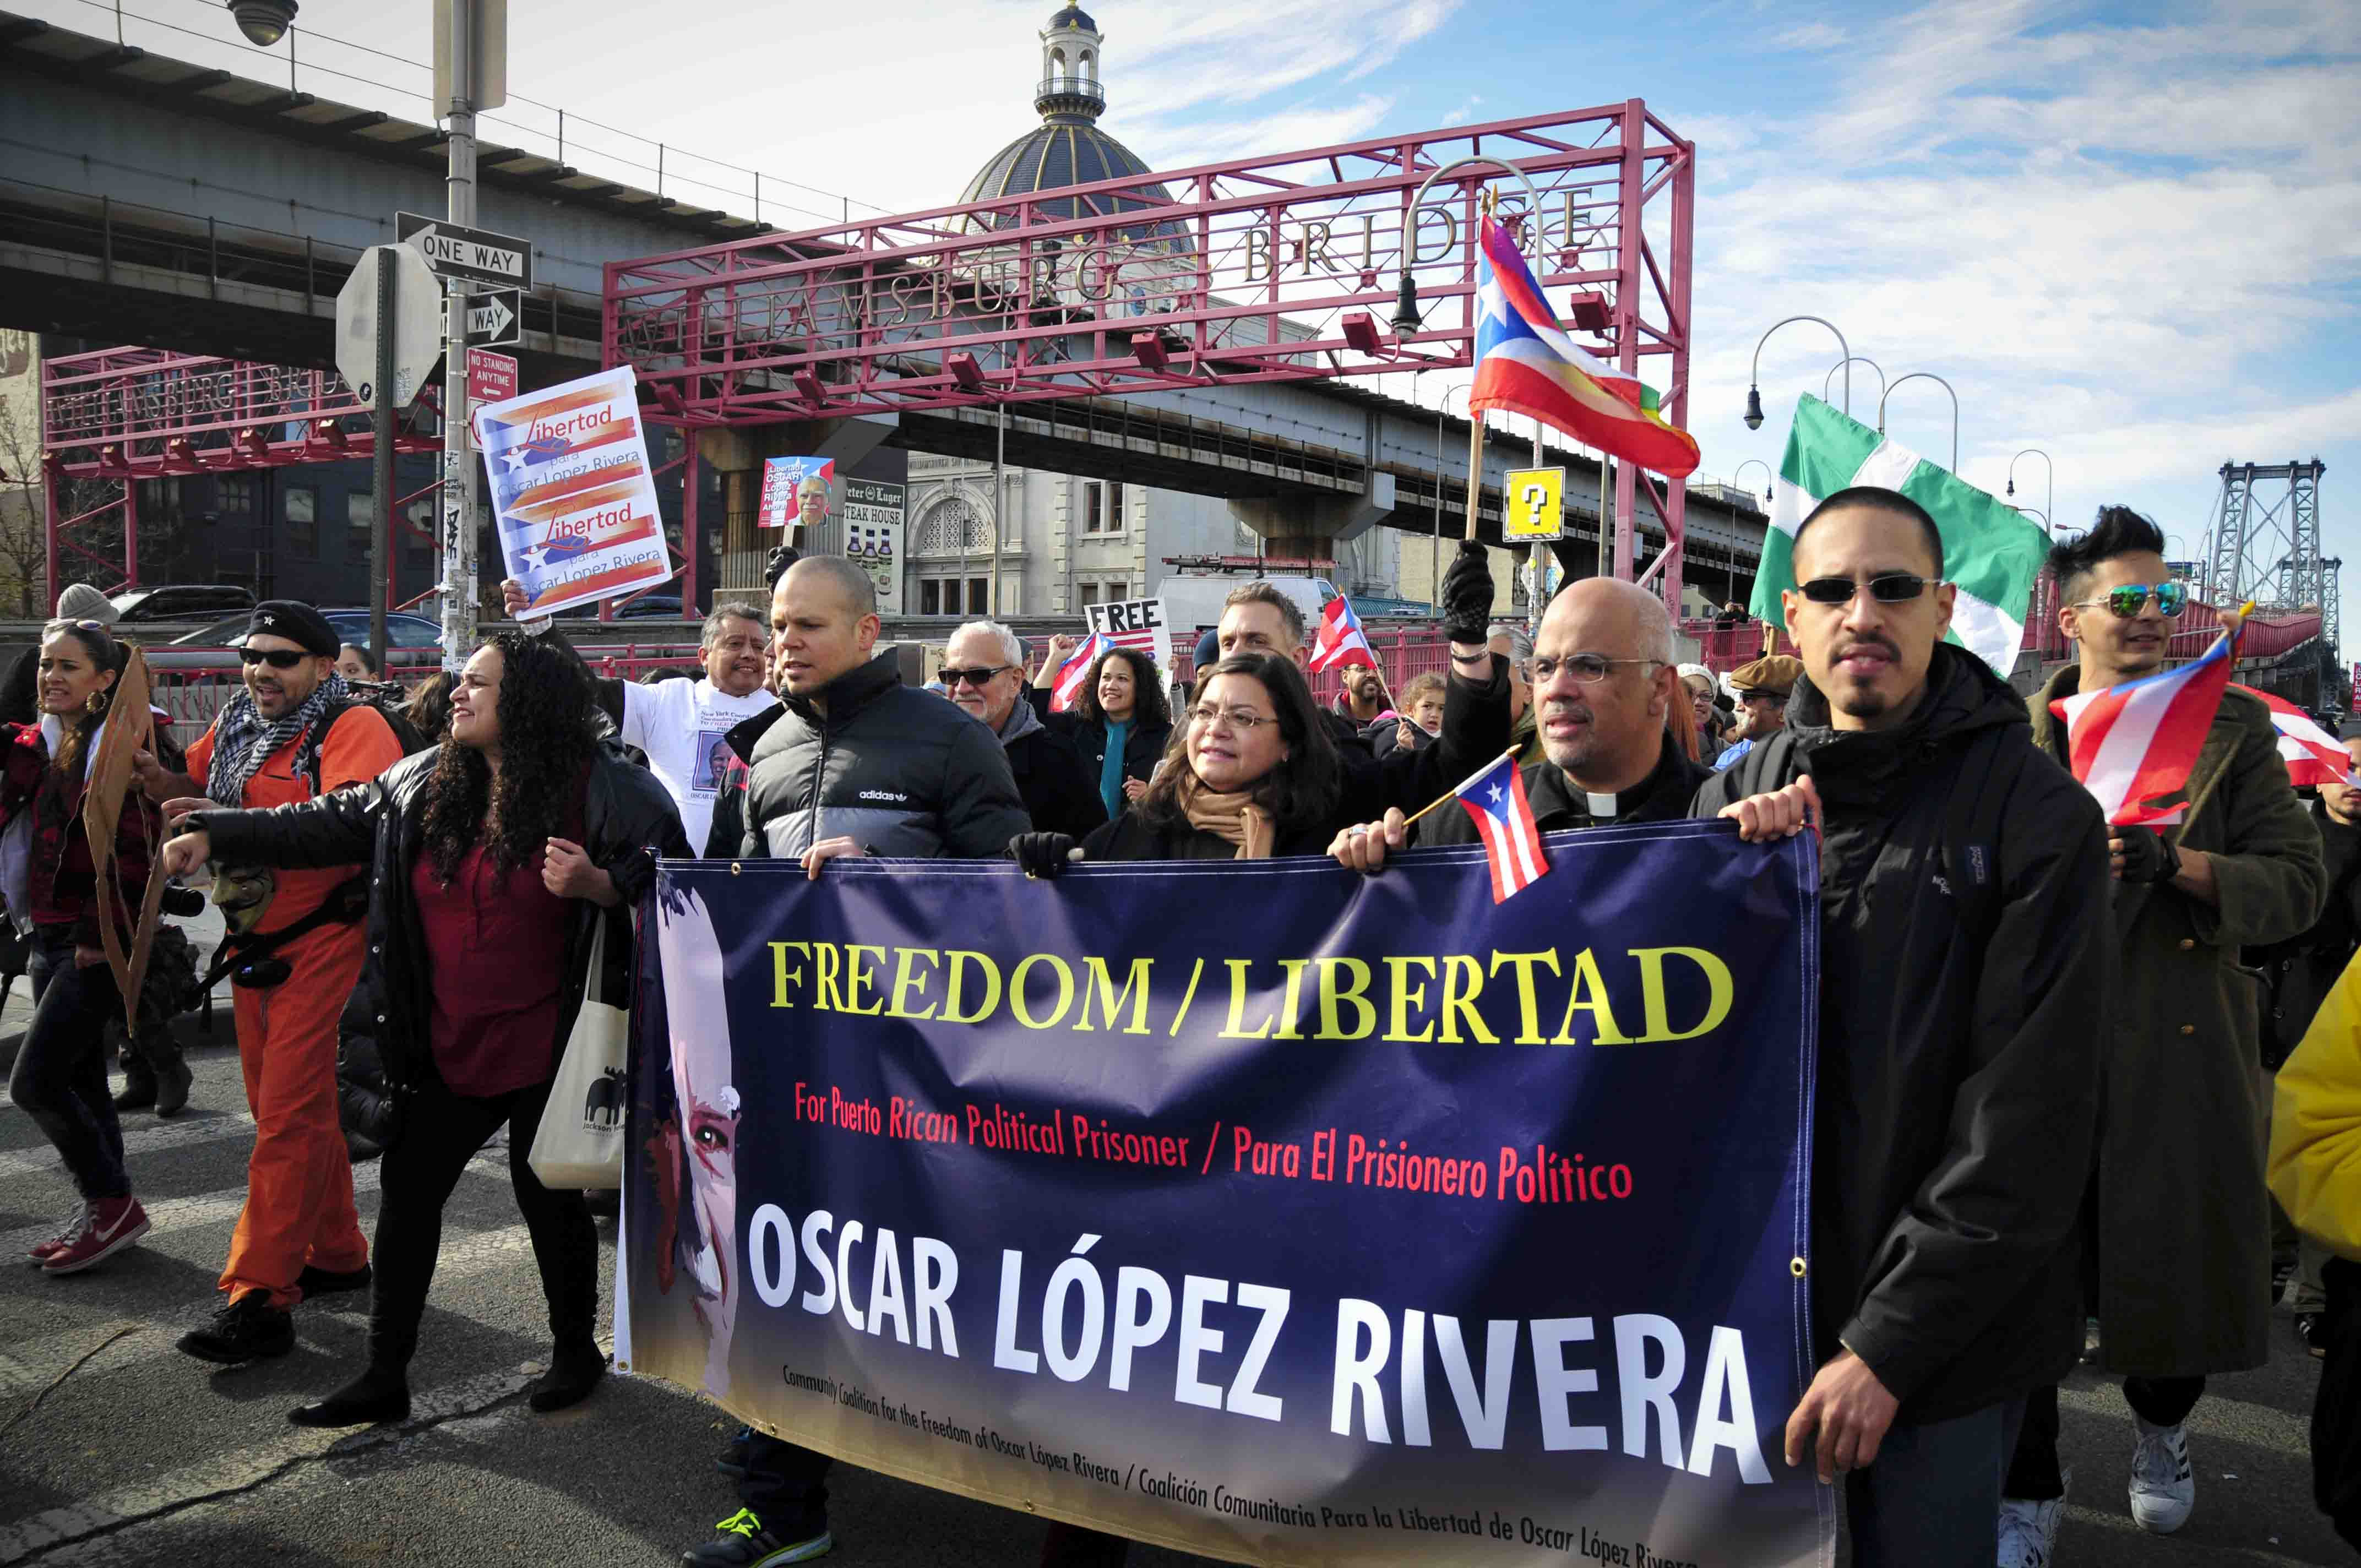 "Each day Oscar Lopez remains in a federal prison constitutes disproportionate and inhumane punishment which violates fundemental principles of justice and human rights."